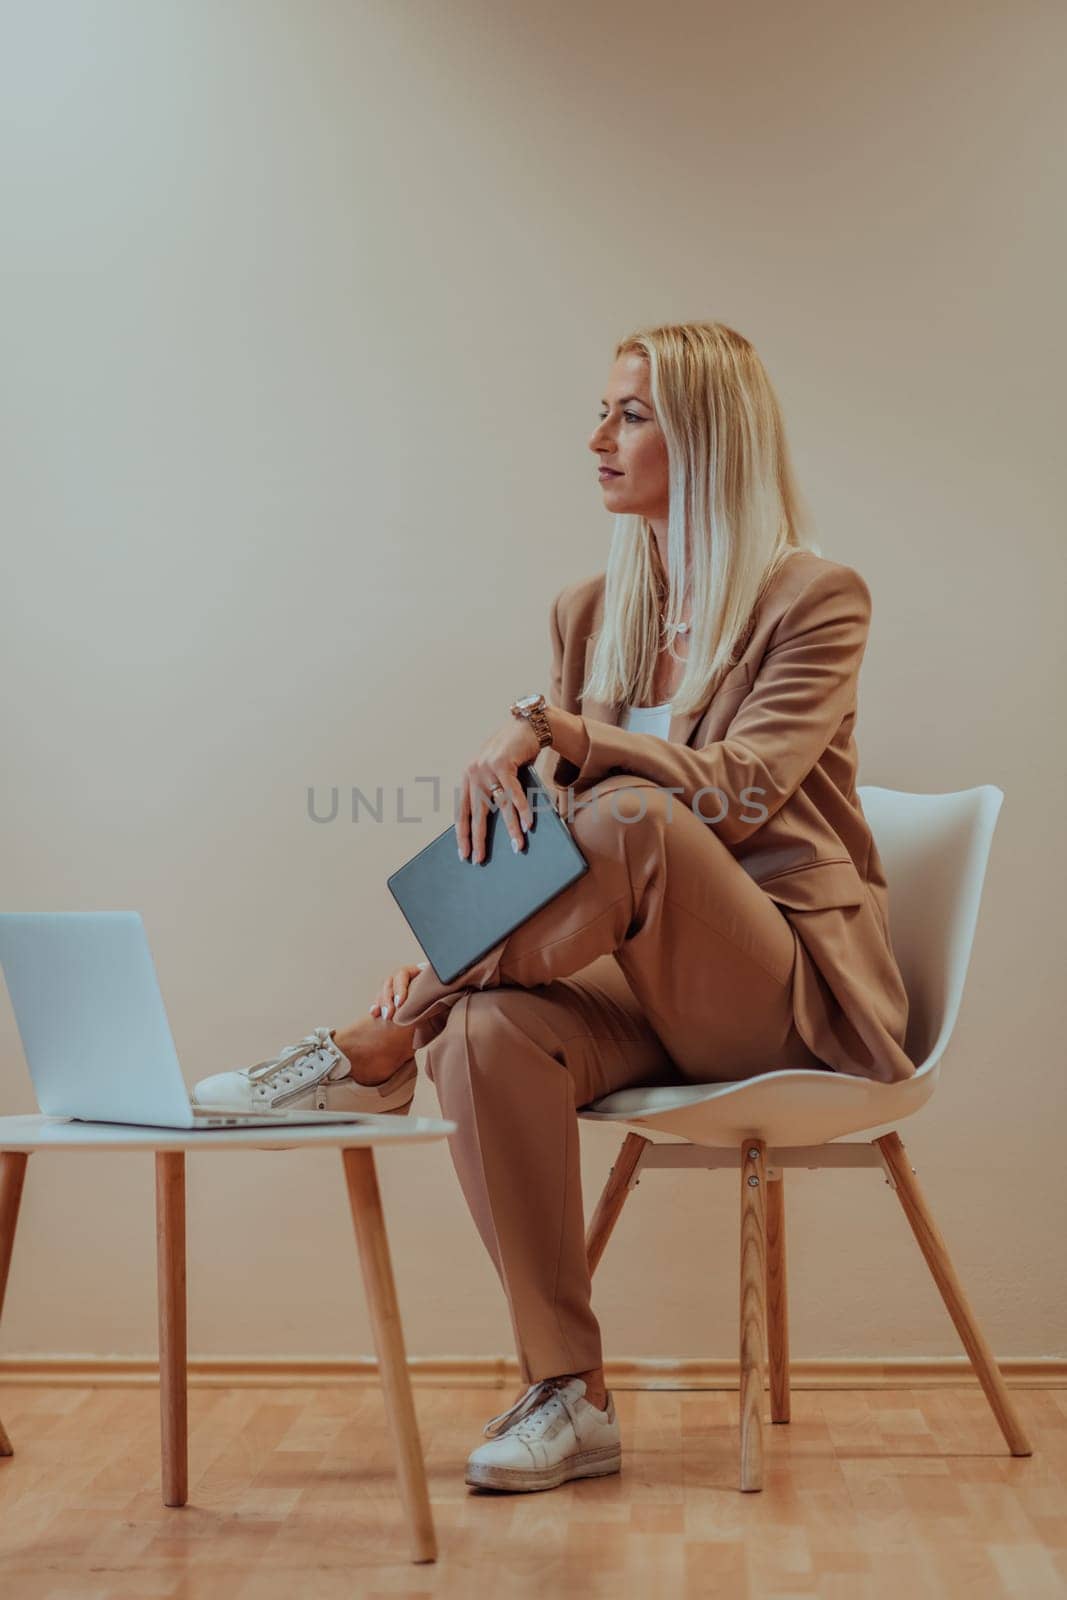 A professional businesswoman sits on a chair, surrounded by a serene beige background, diligently working on her laptop, showcasing dedication and focus in her pursuit of success.